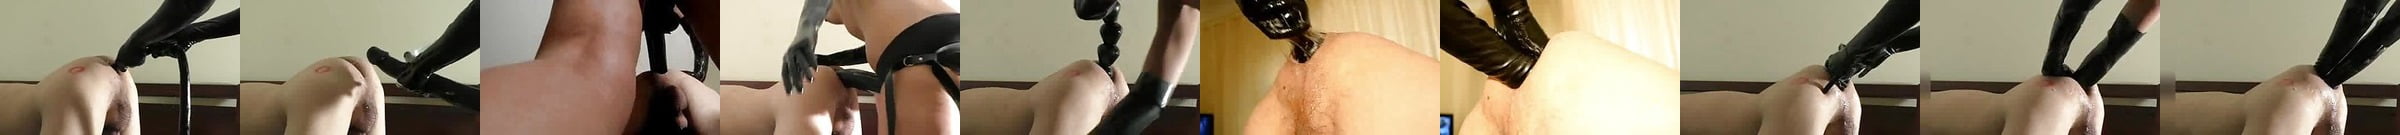 Extreme Pegging Anal Destruction With Huge Dildos Gay Xhamster